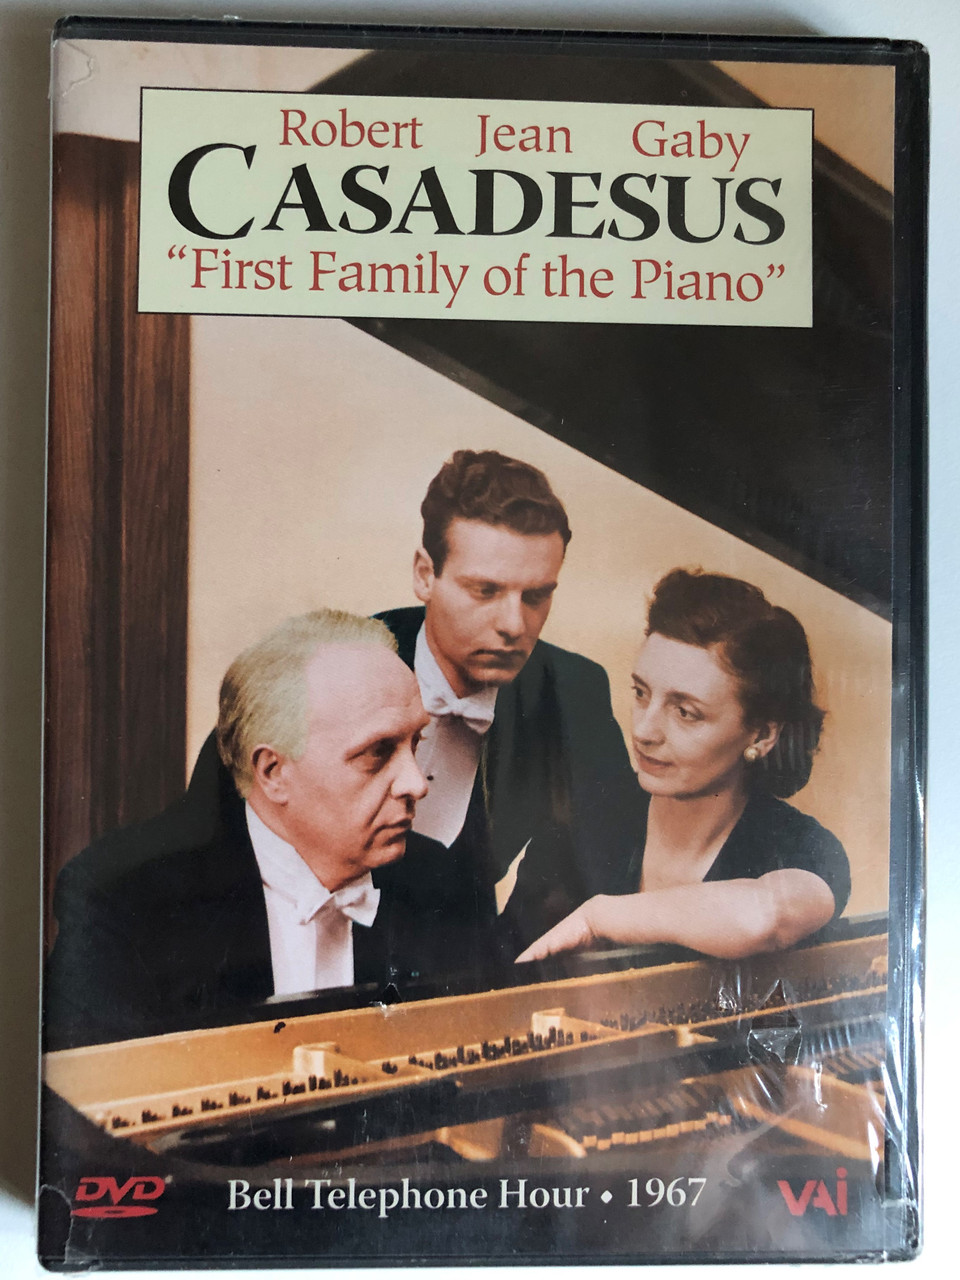 Casadesus_-_The_First_Family_of_the_Piano_Beethoven_Appassionata_Sonata_3rd_mvt._-_J._S._Bach_Concerto_for_3_pianos_in_D_Minor_3rd_mvt._Bonus_Bell_Telephone_Hour_Performance___30303.1691991582.1280.1280.JPG (960×1280)